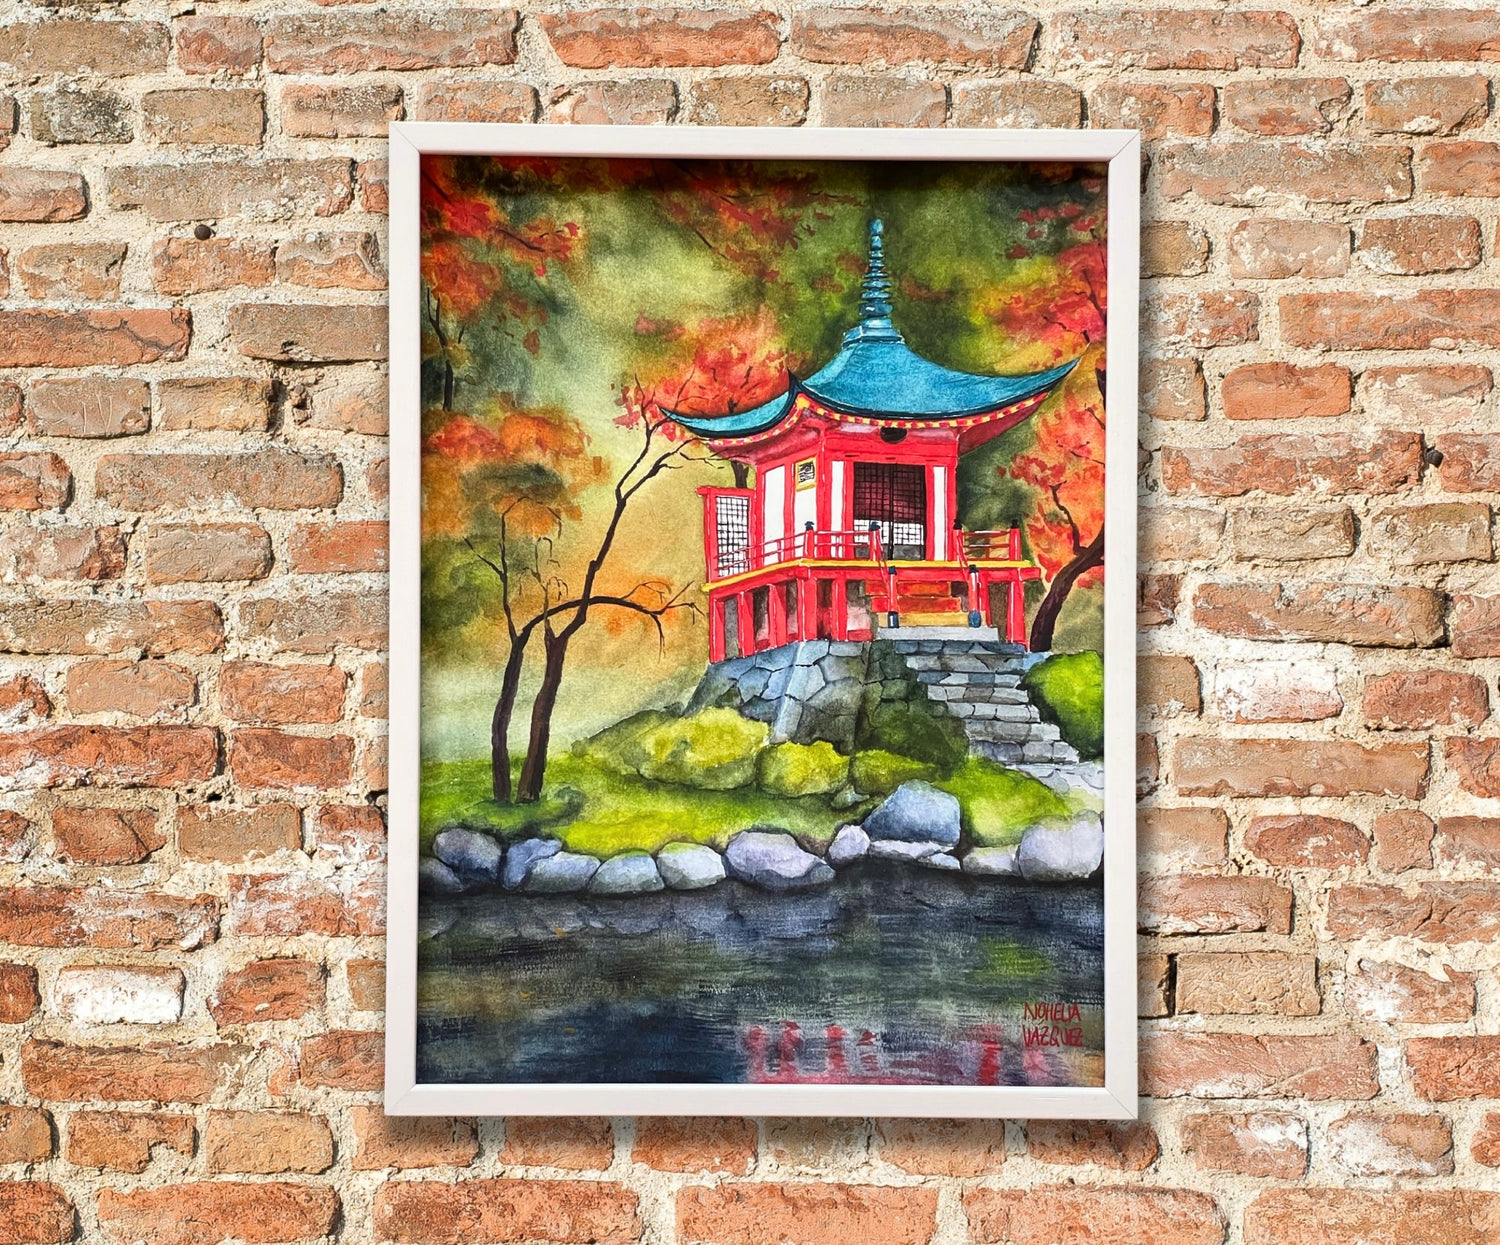 kyoto temple art print hanged in wall